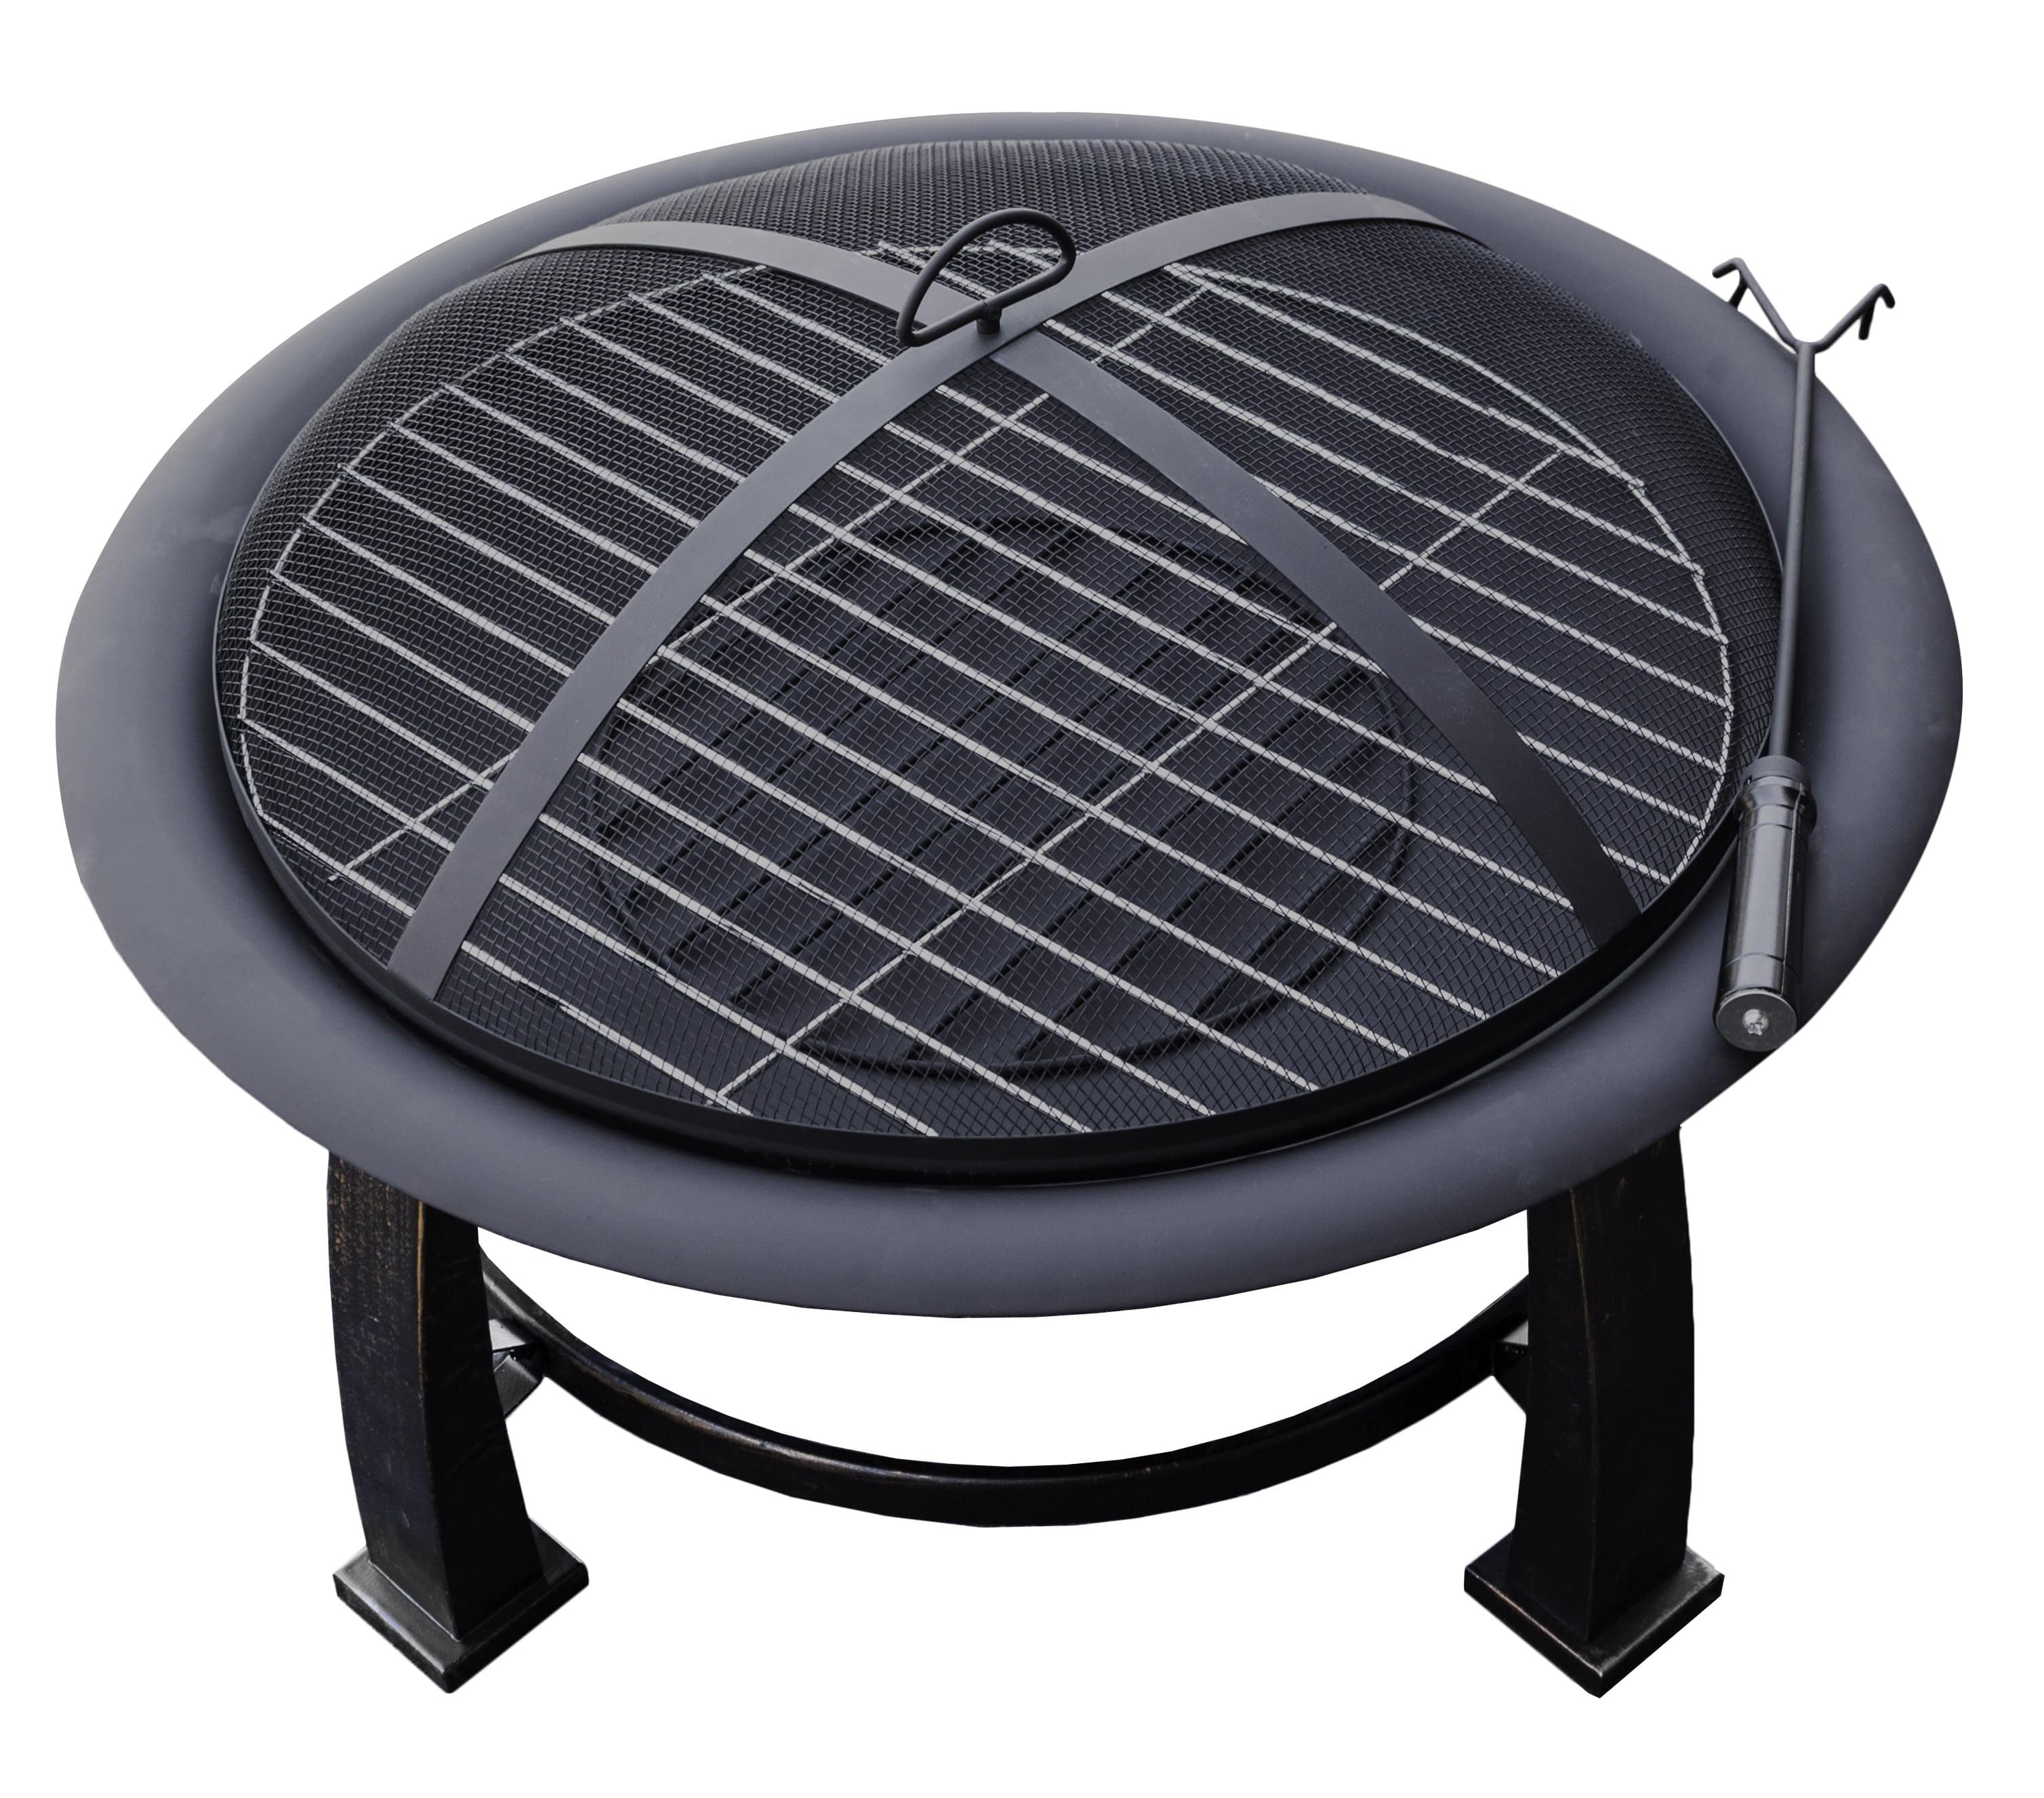 Hiland Fire Pits Hiland Patio Heaters Wood Burning Fire Pit with Cooking Grate